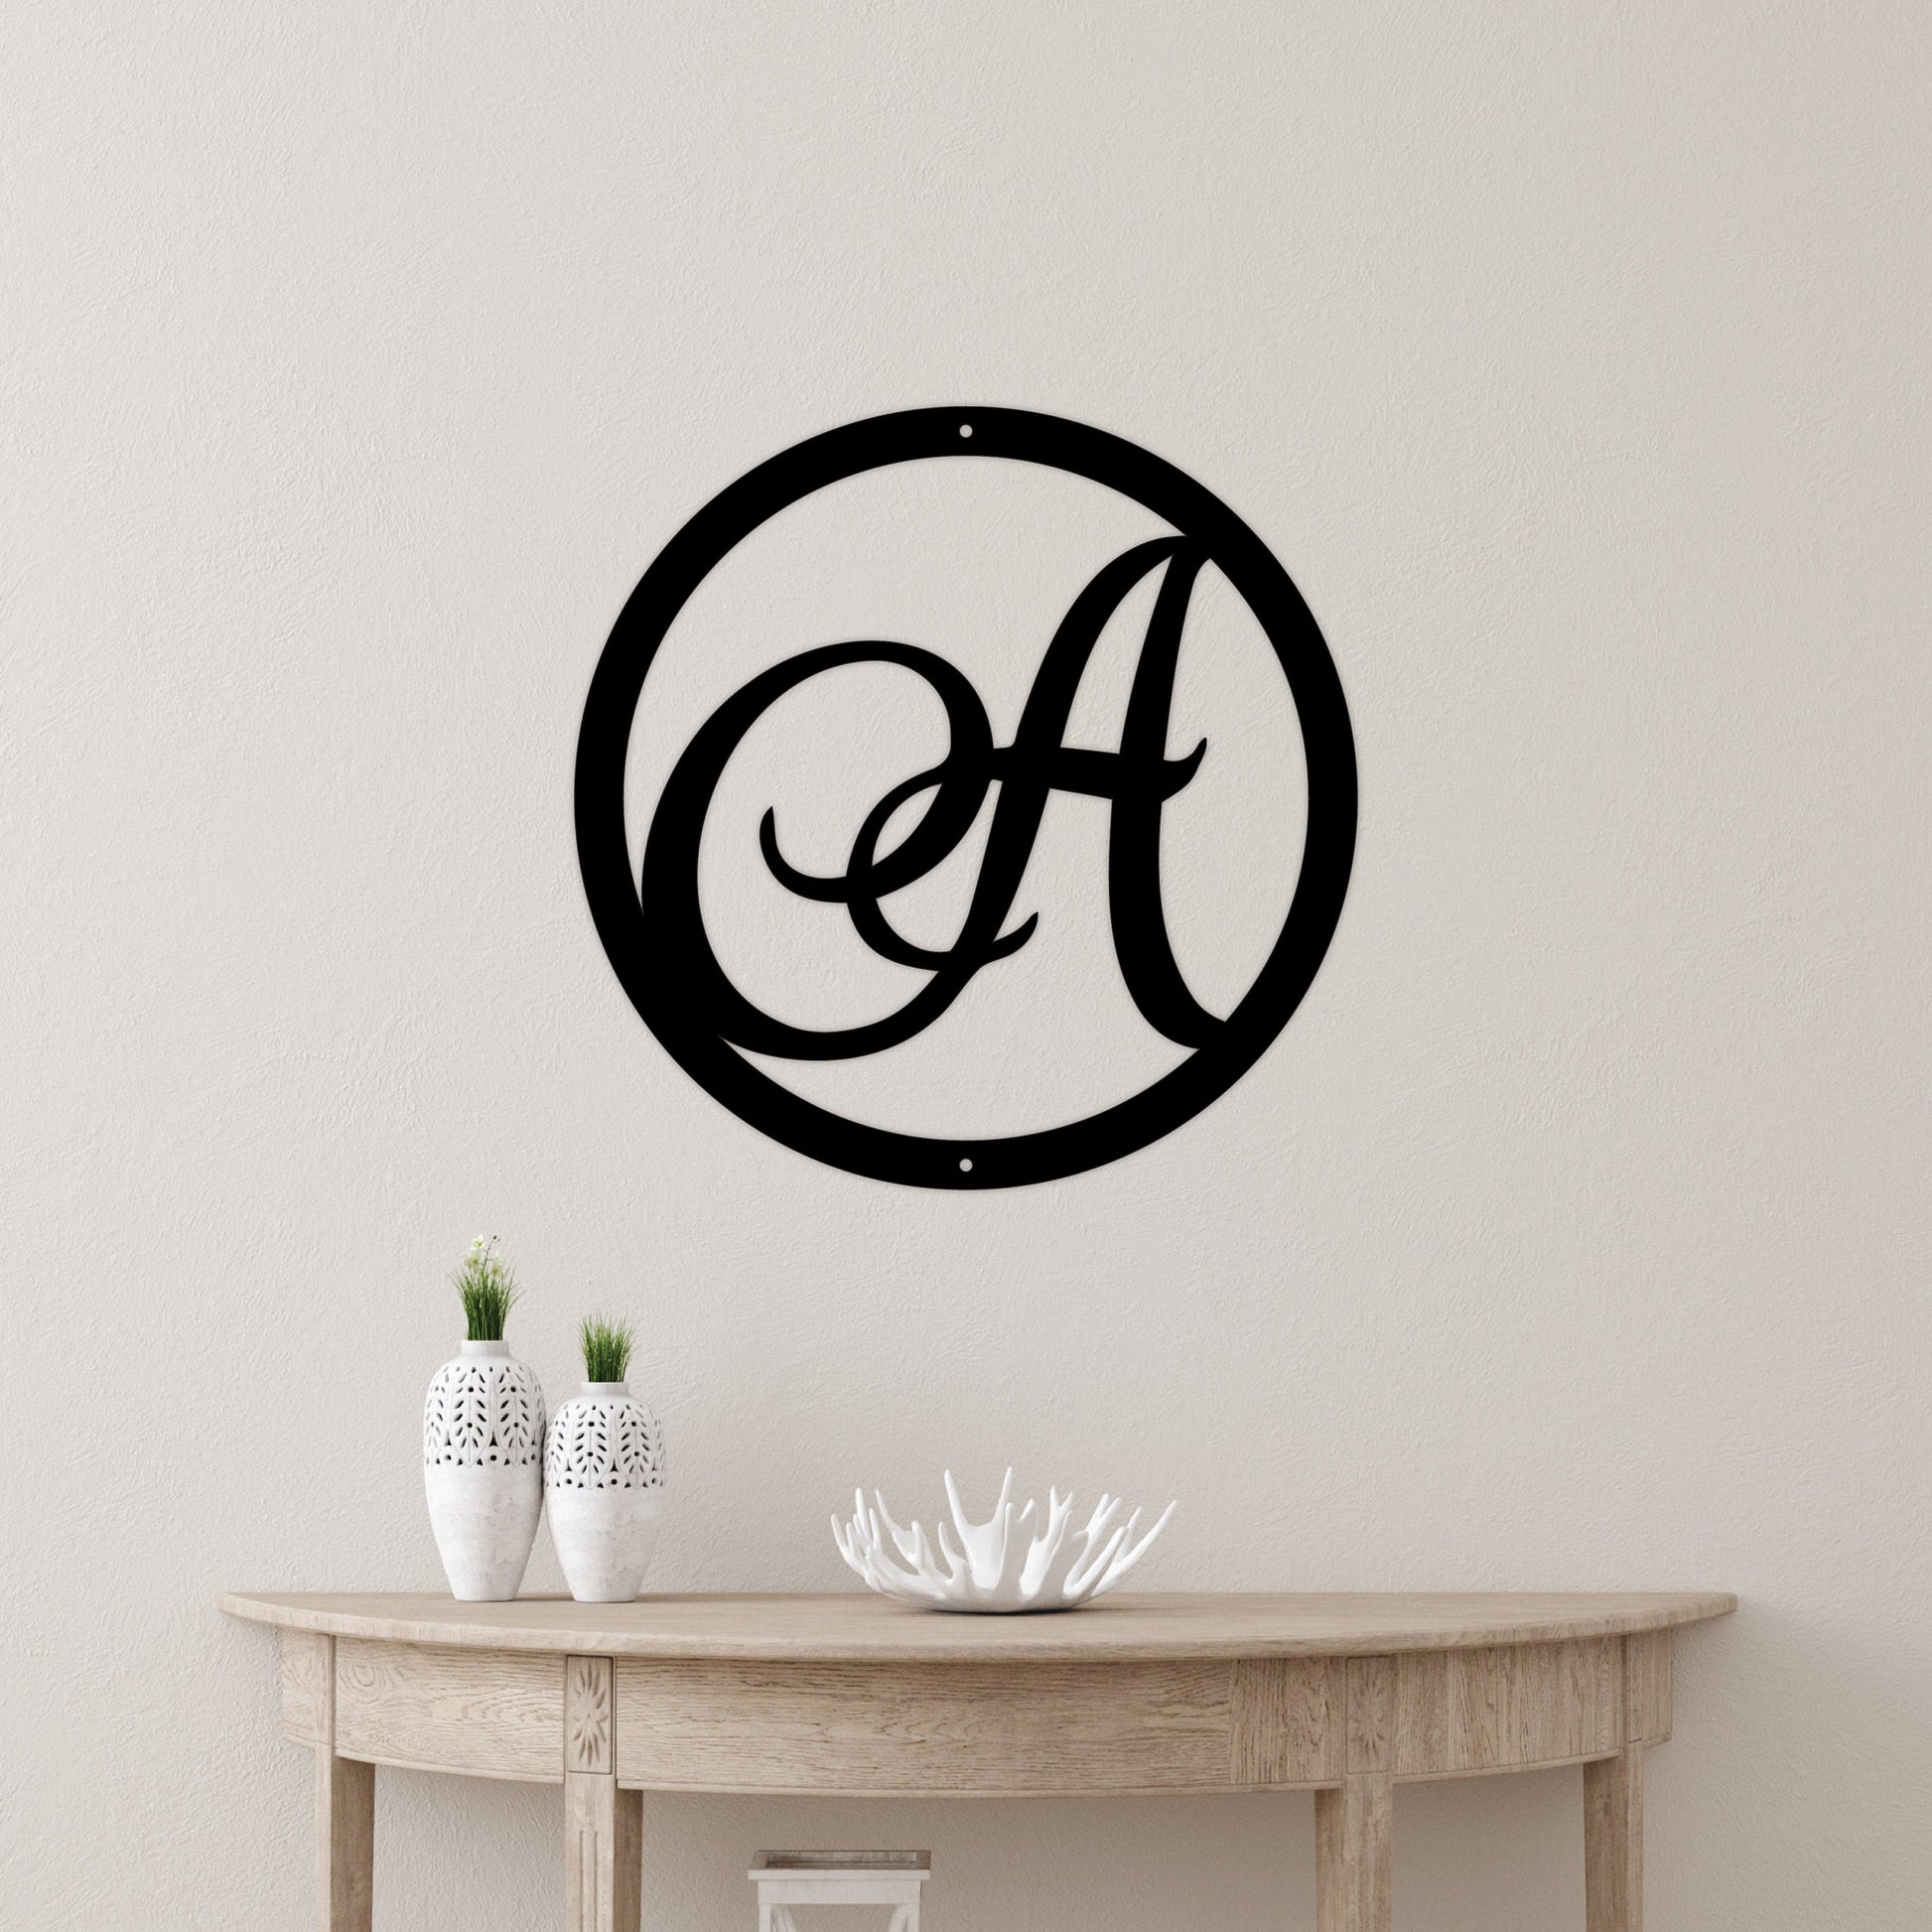 Personalized Family Name Monogram Sign, Monogram Wreath Insert, Decorative Wooden Family Wall Décor, Custom Home Decor, Farmhouse Chic Sign